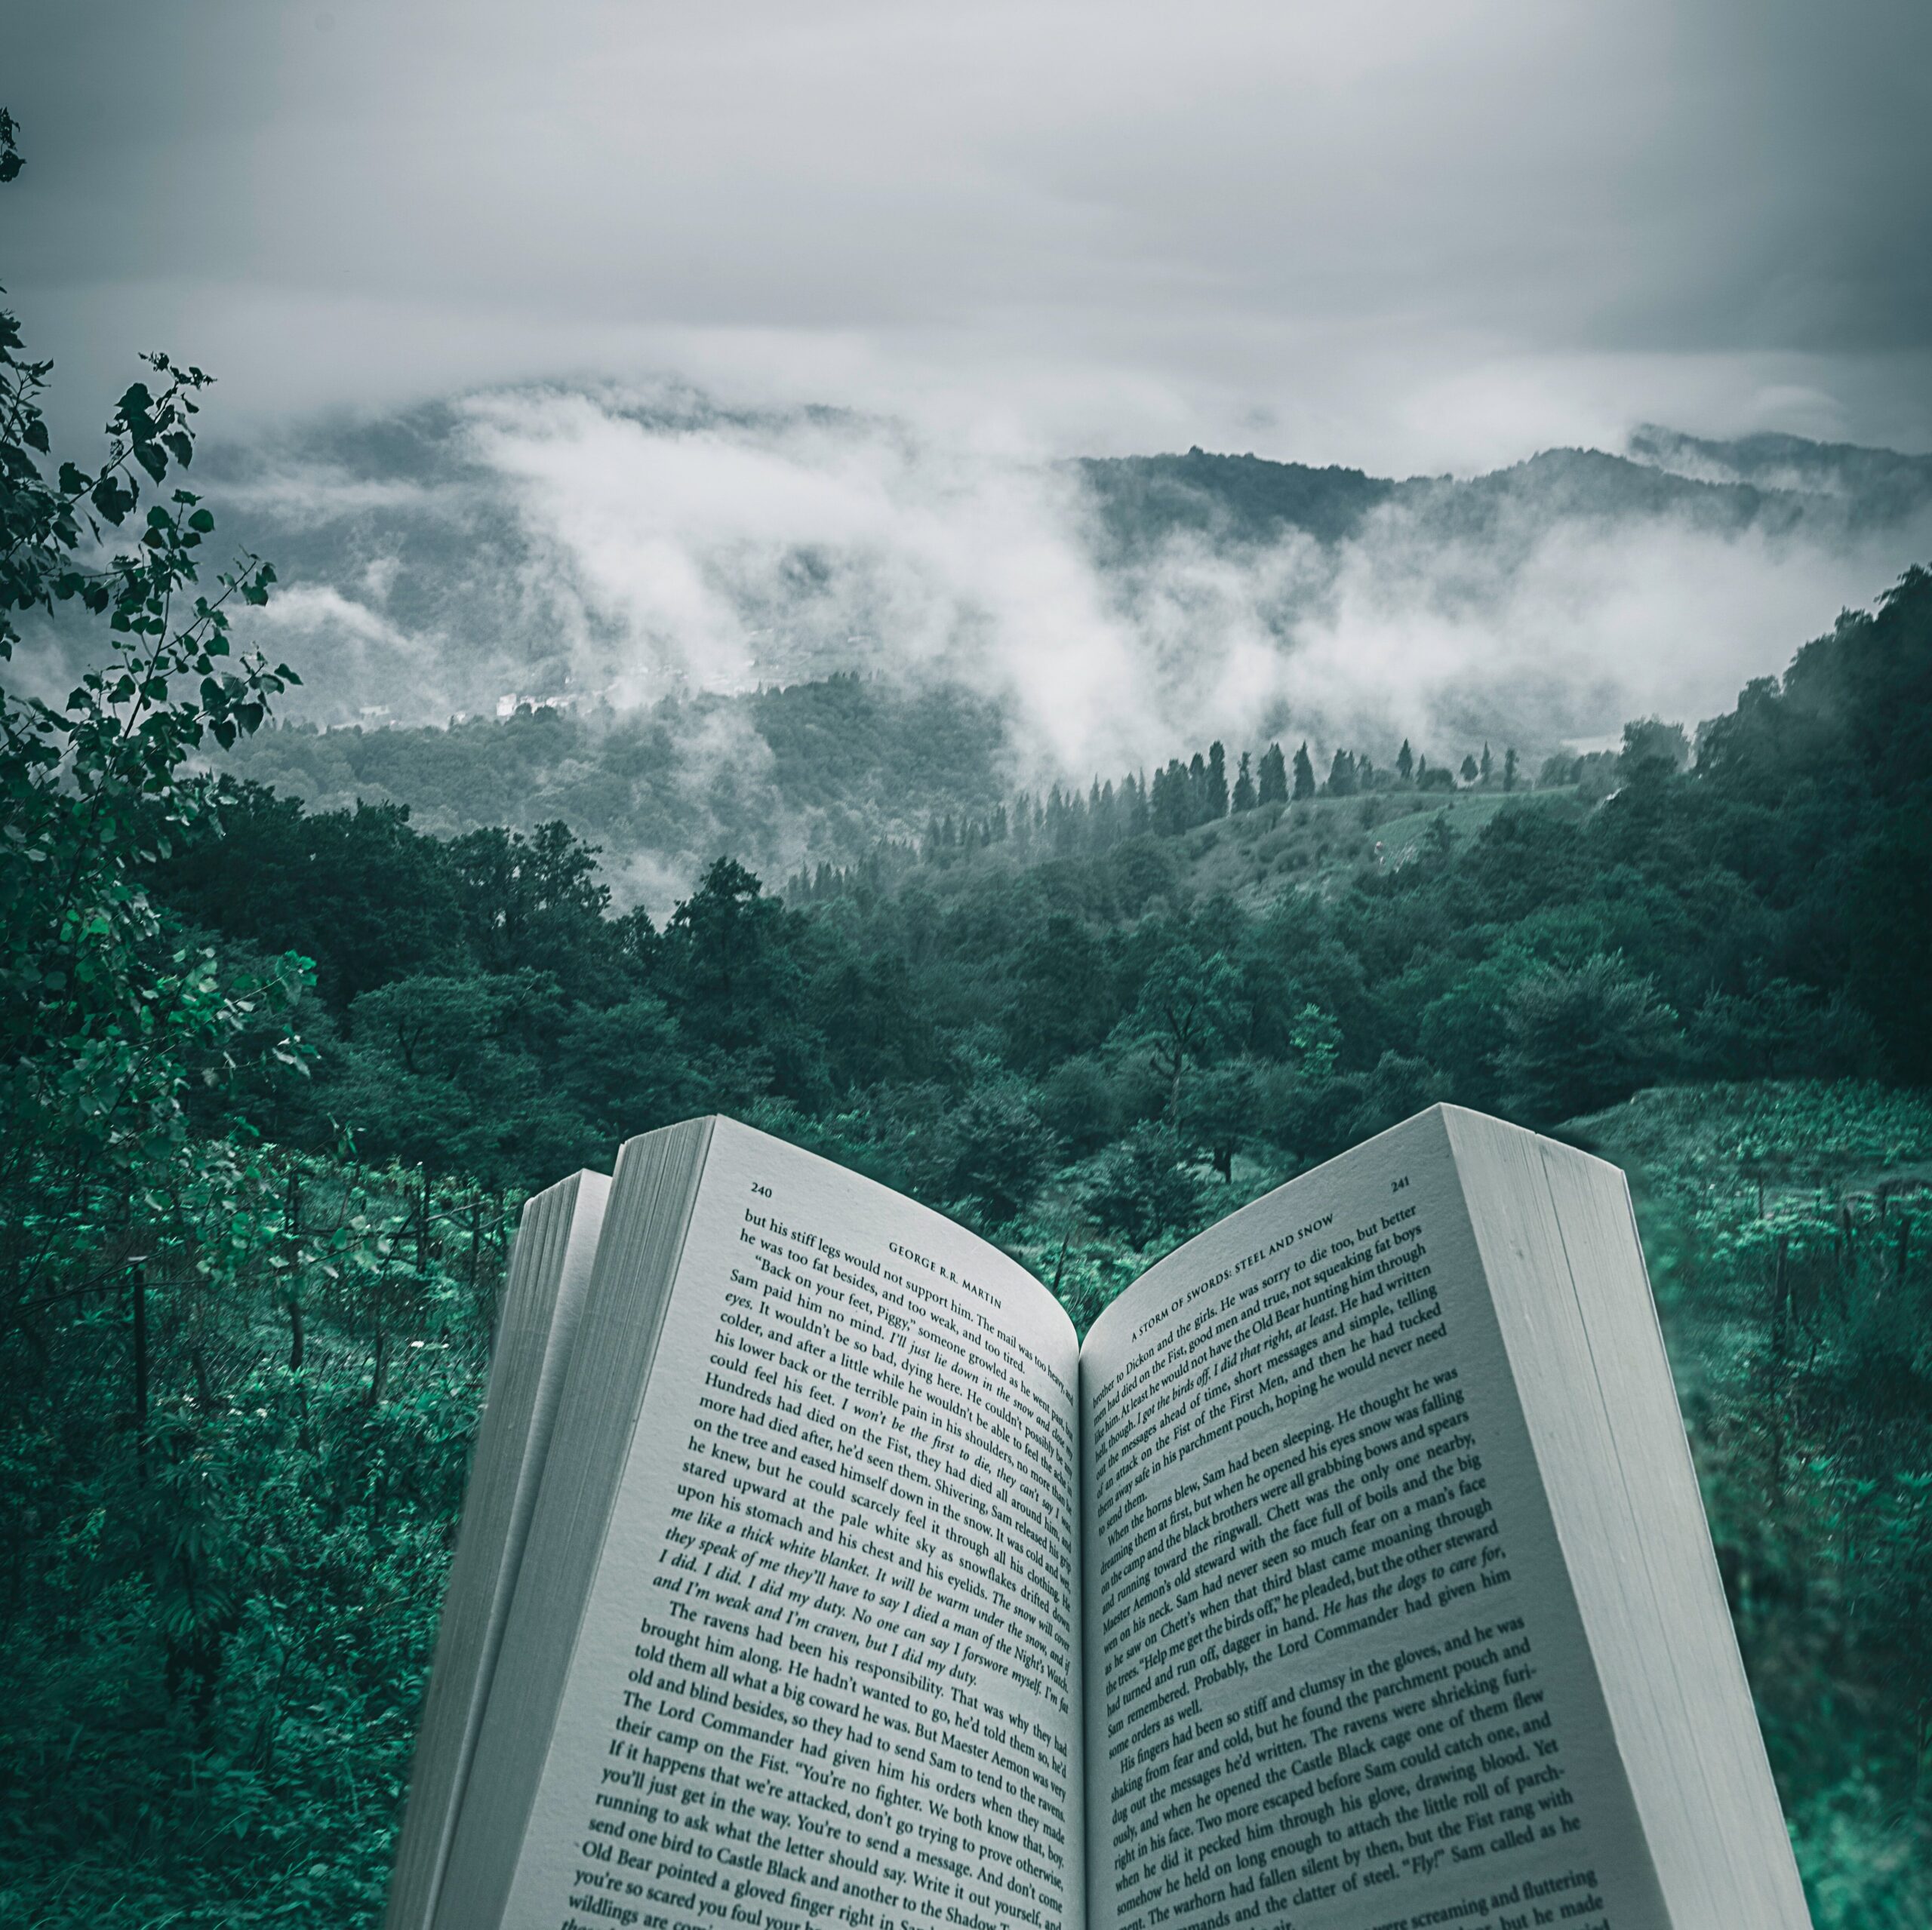 photo of a book in someone's hand. The view is a forest with a cloudy sky